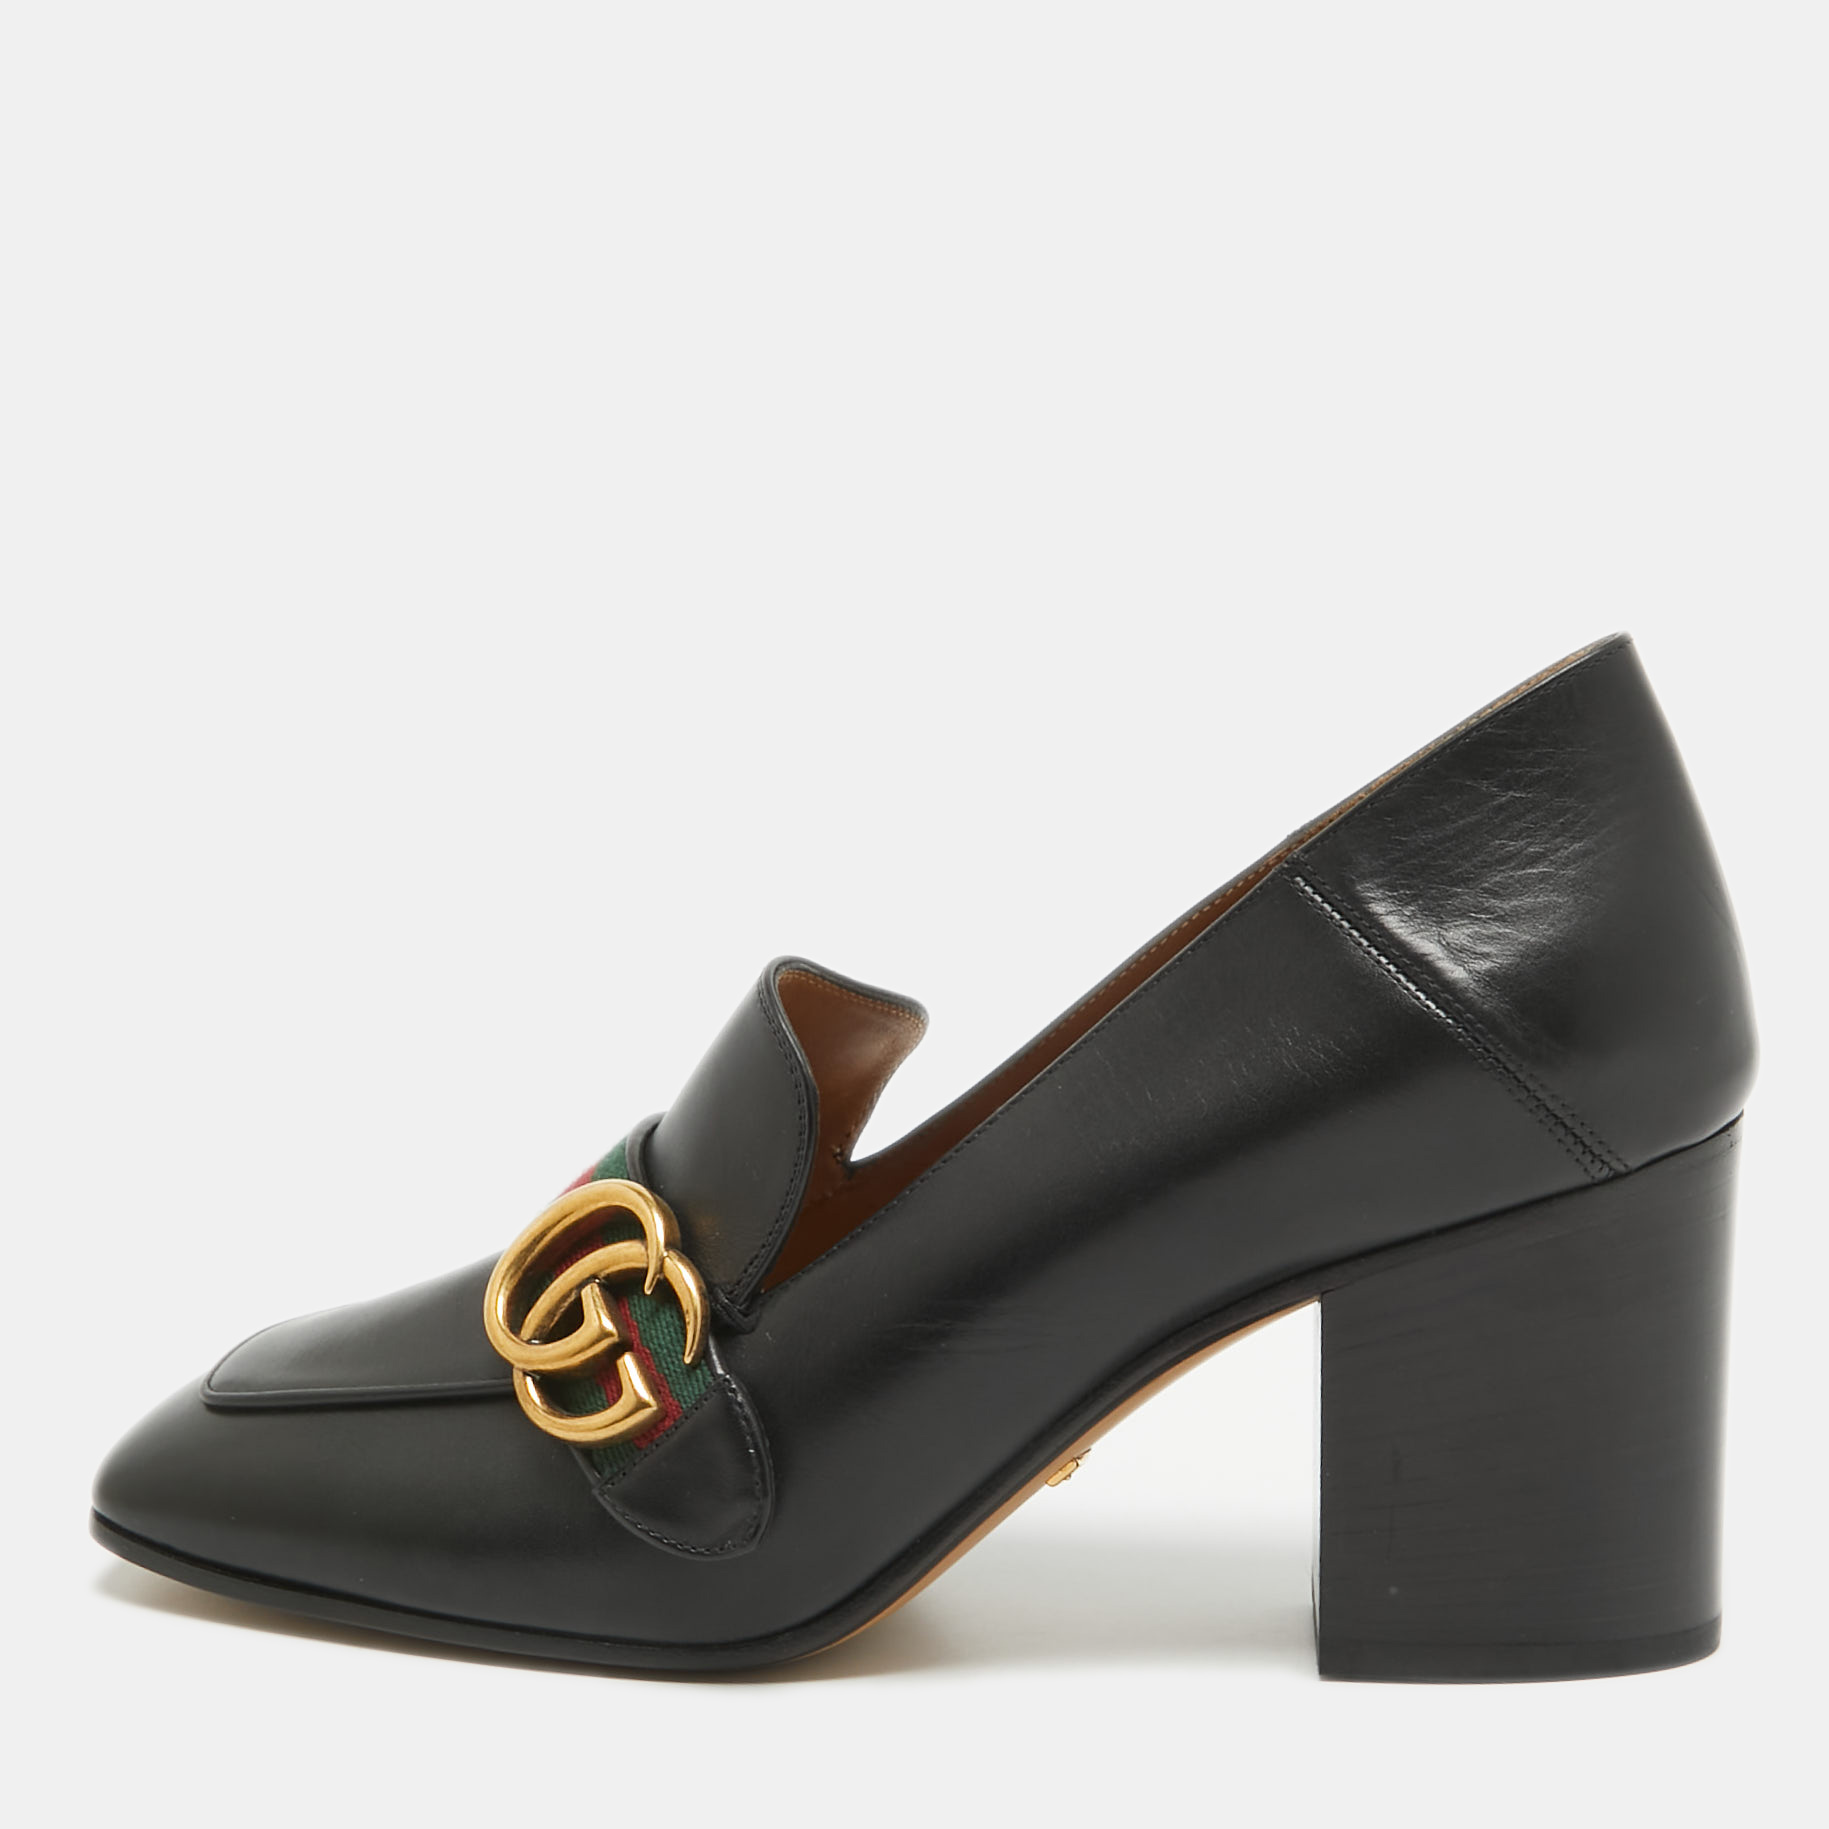 Gucci black leather peyton loafer pumps size 38